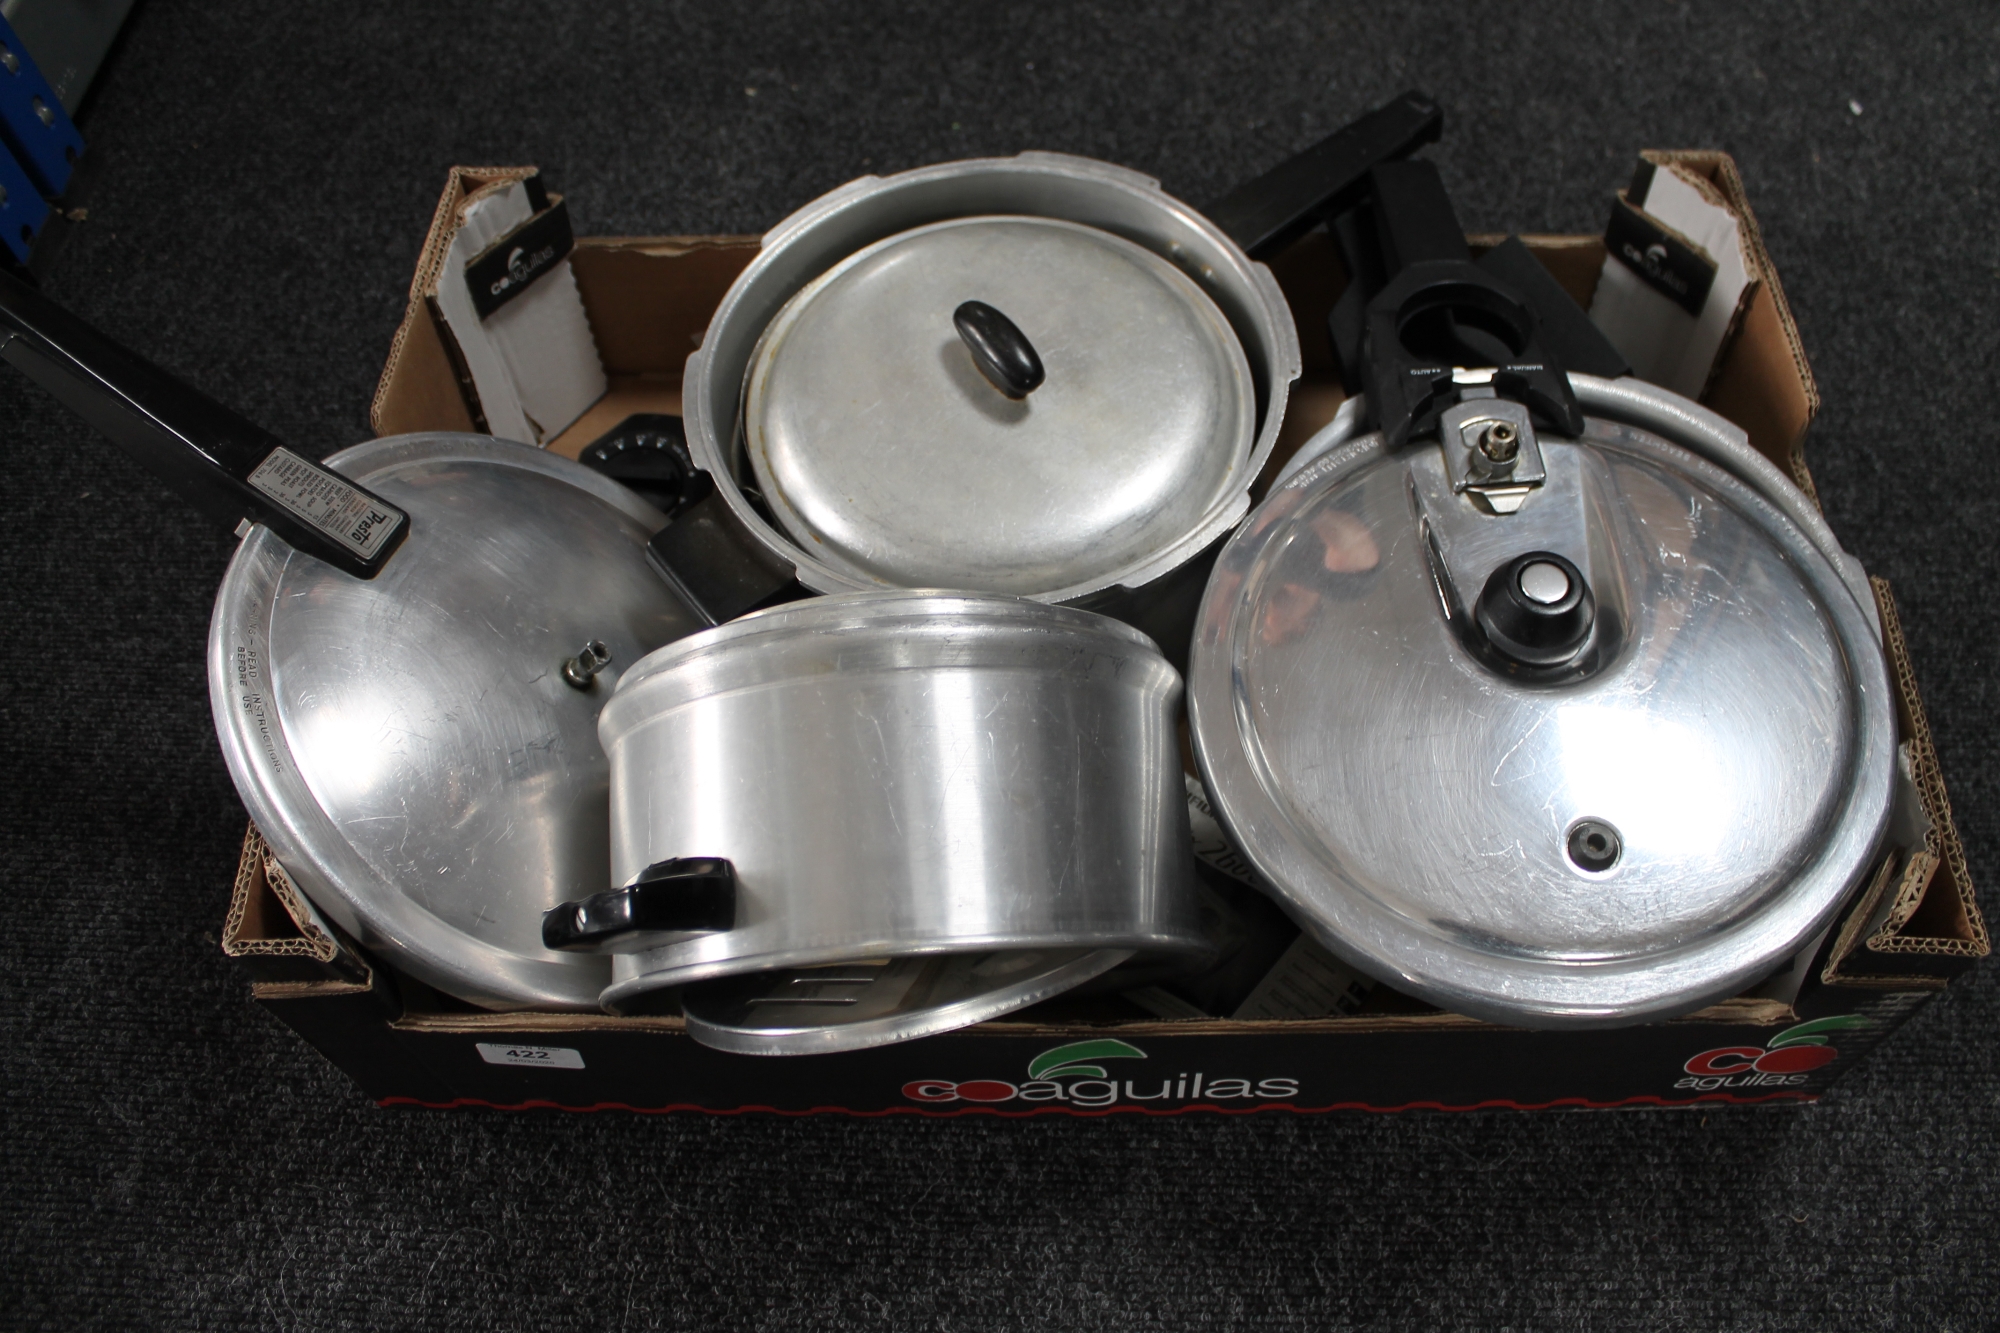 A box of pressure cookers and kitchen ware